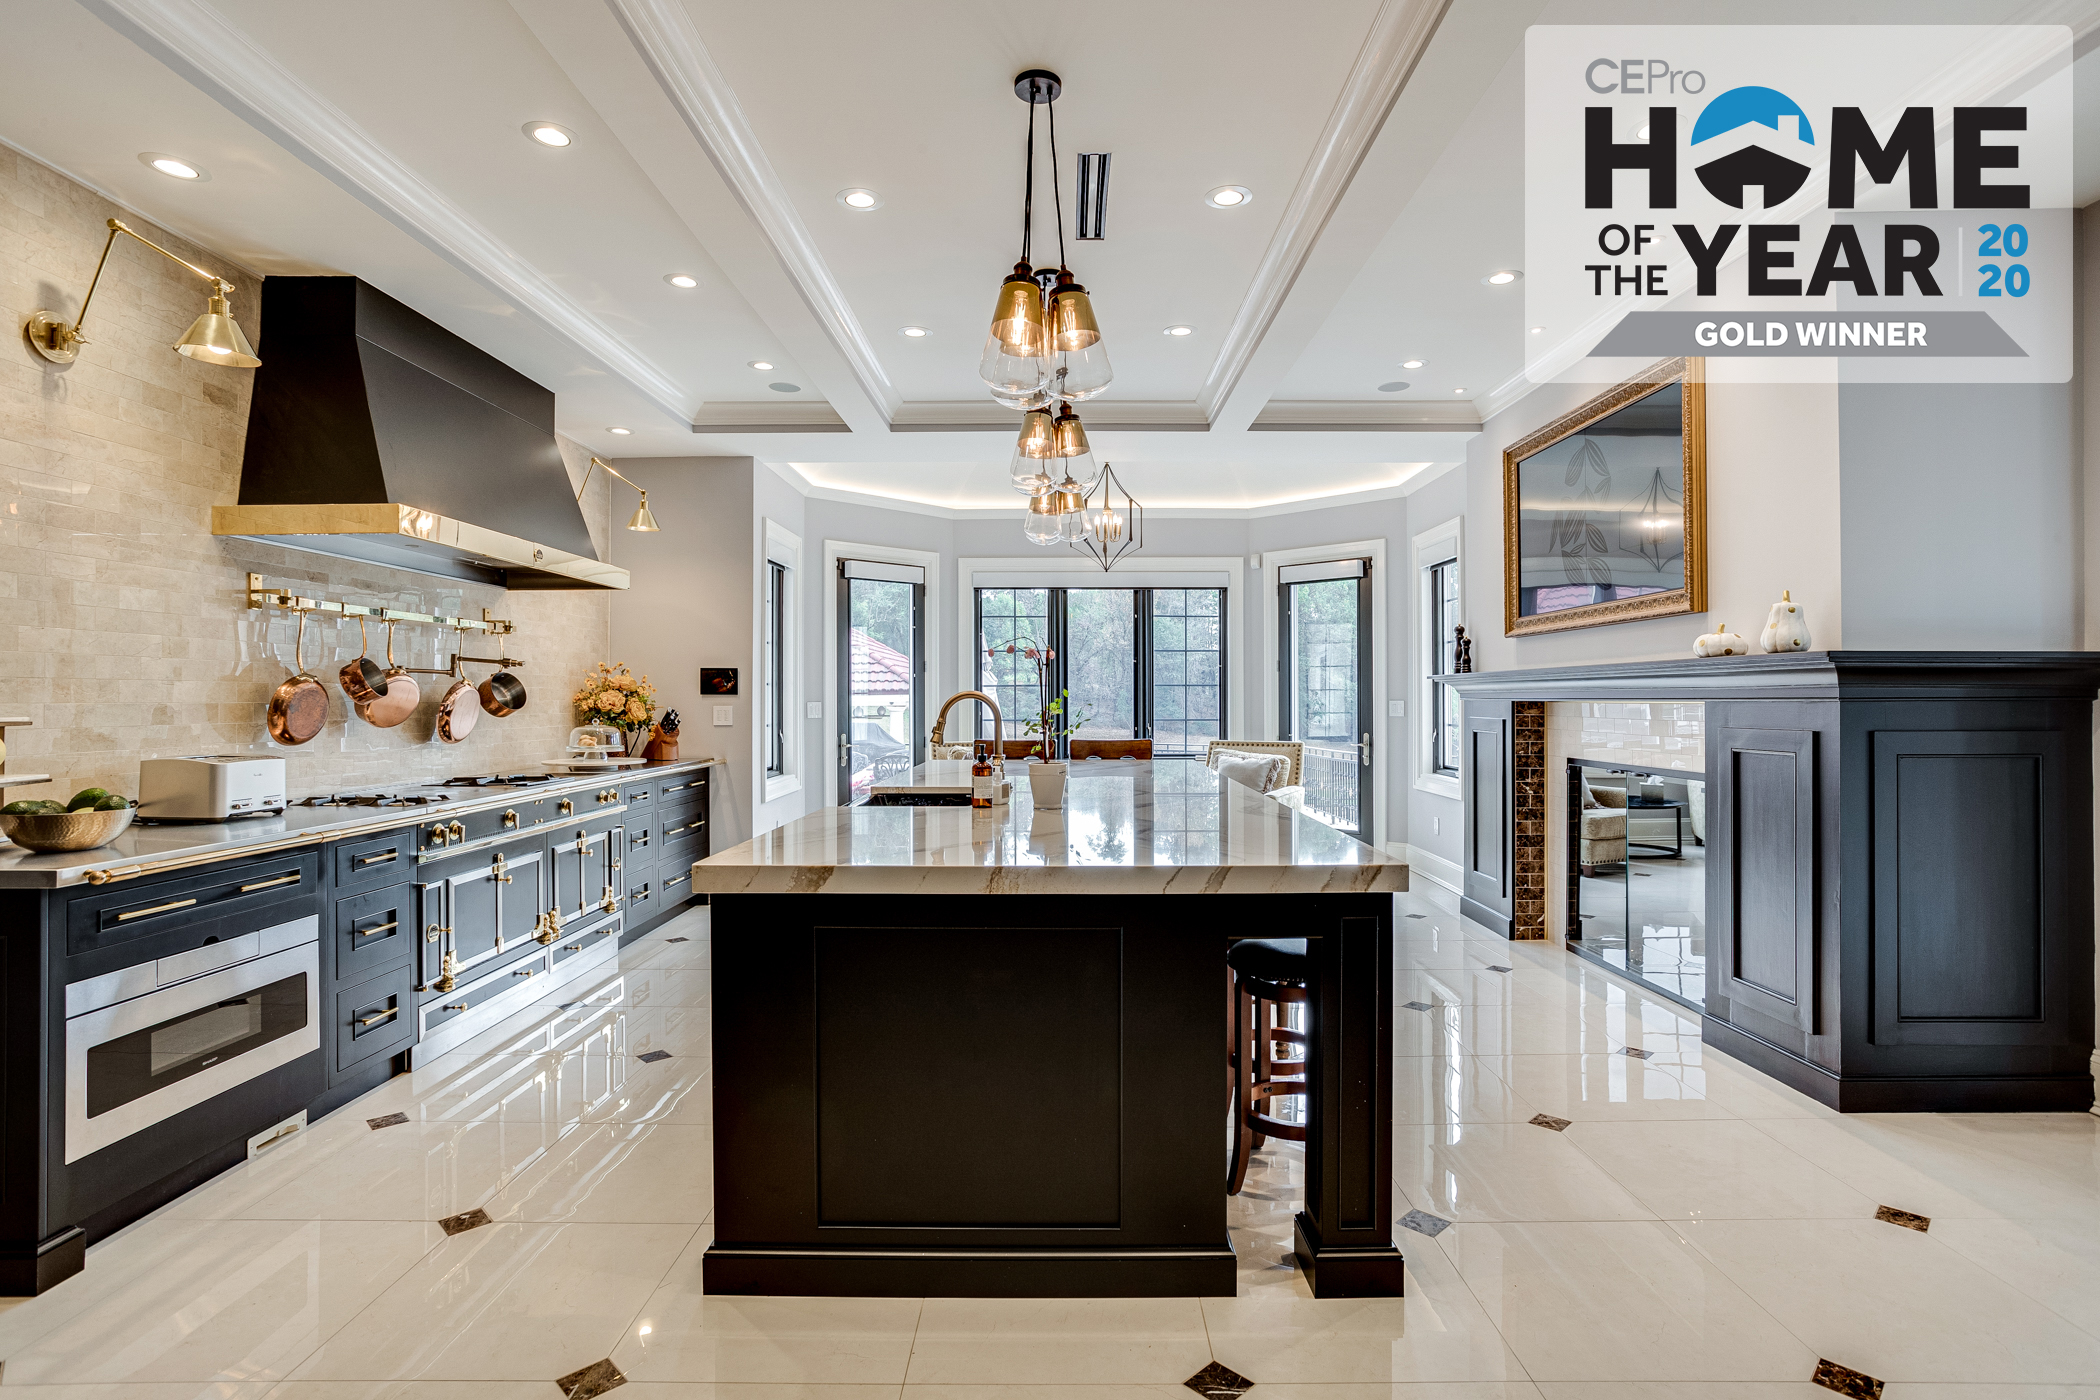 CE Pro 2020 Home of the Year: Gold Award Winner